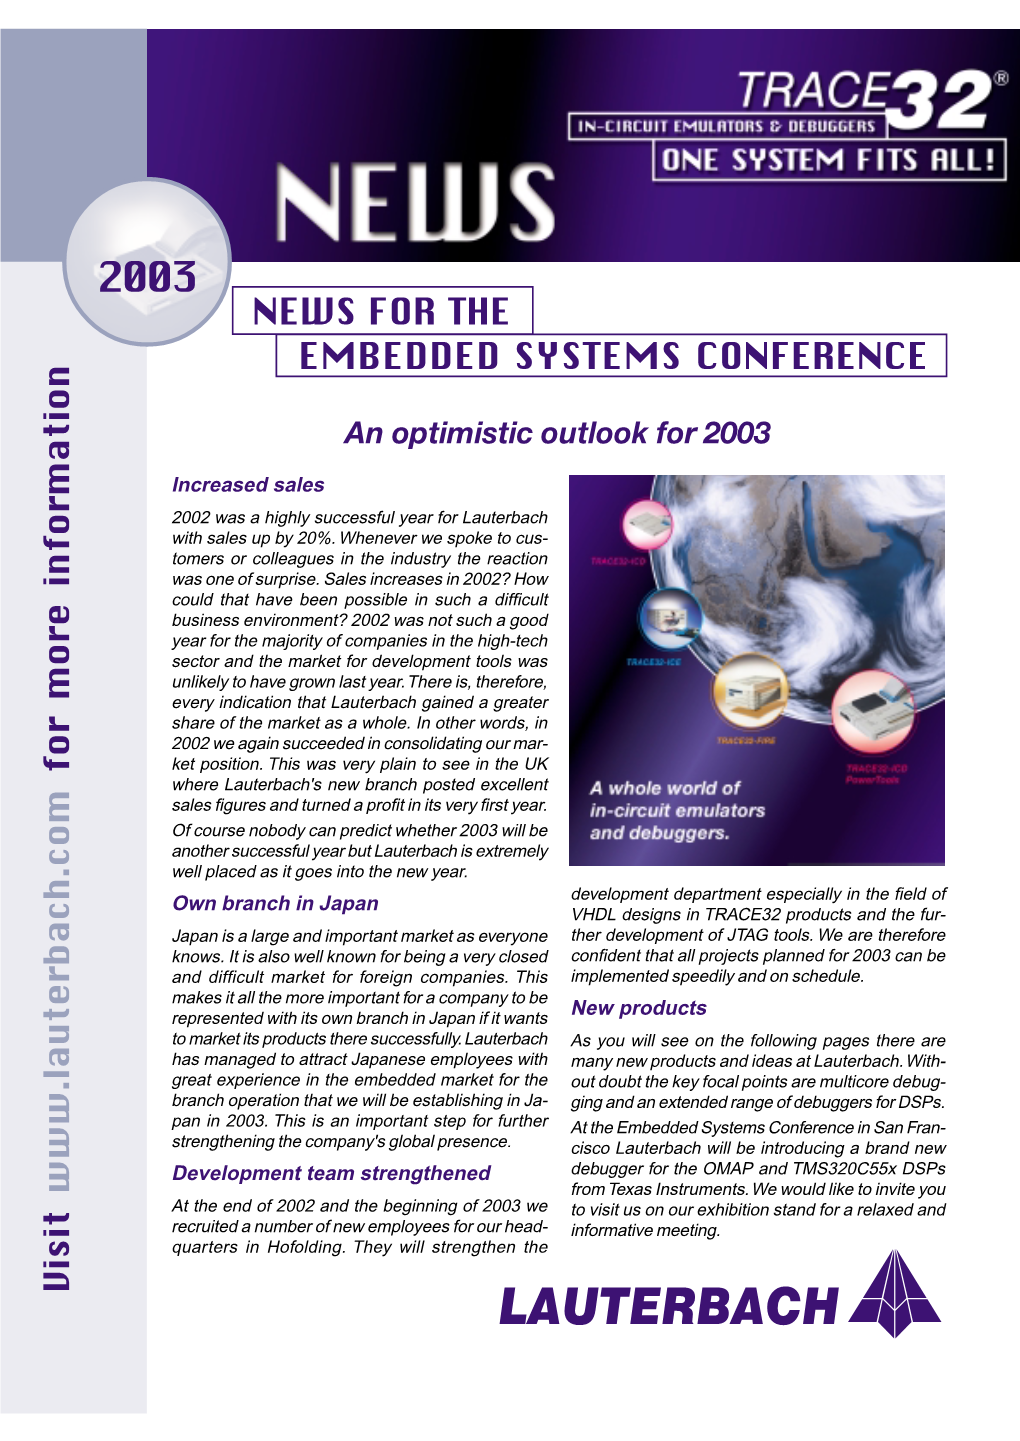 News for the Embedded Systems Conference